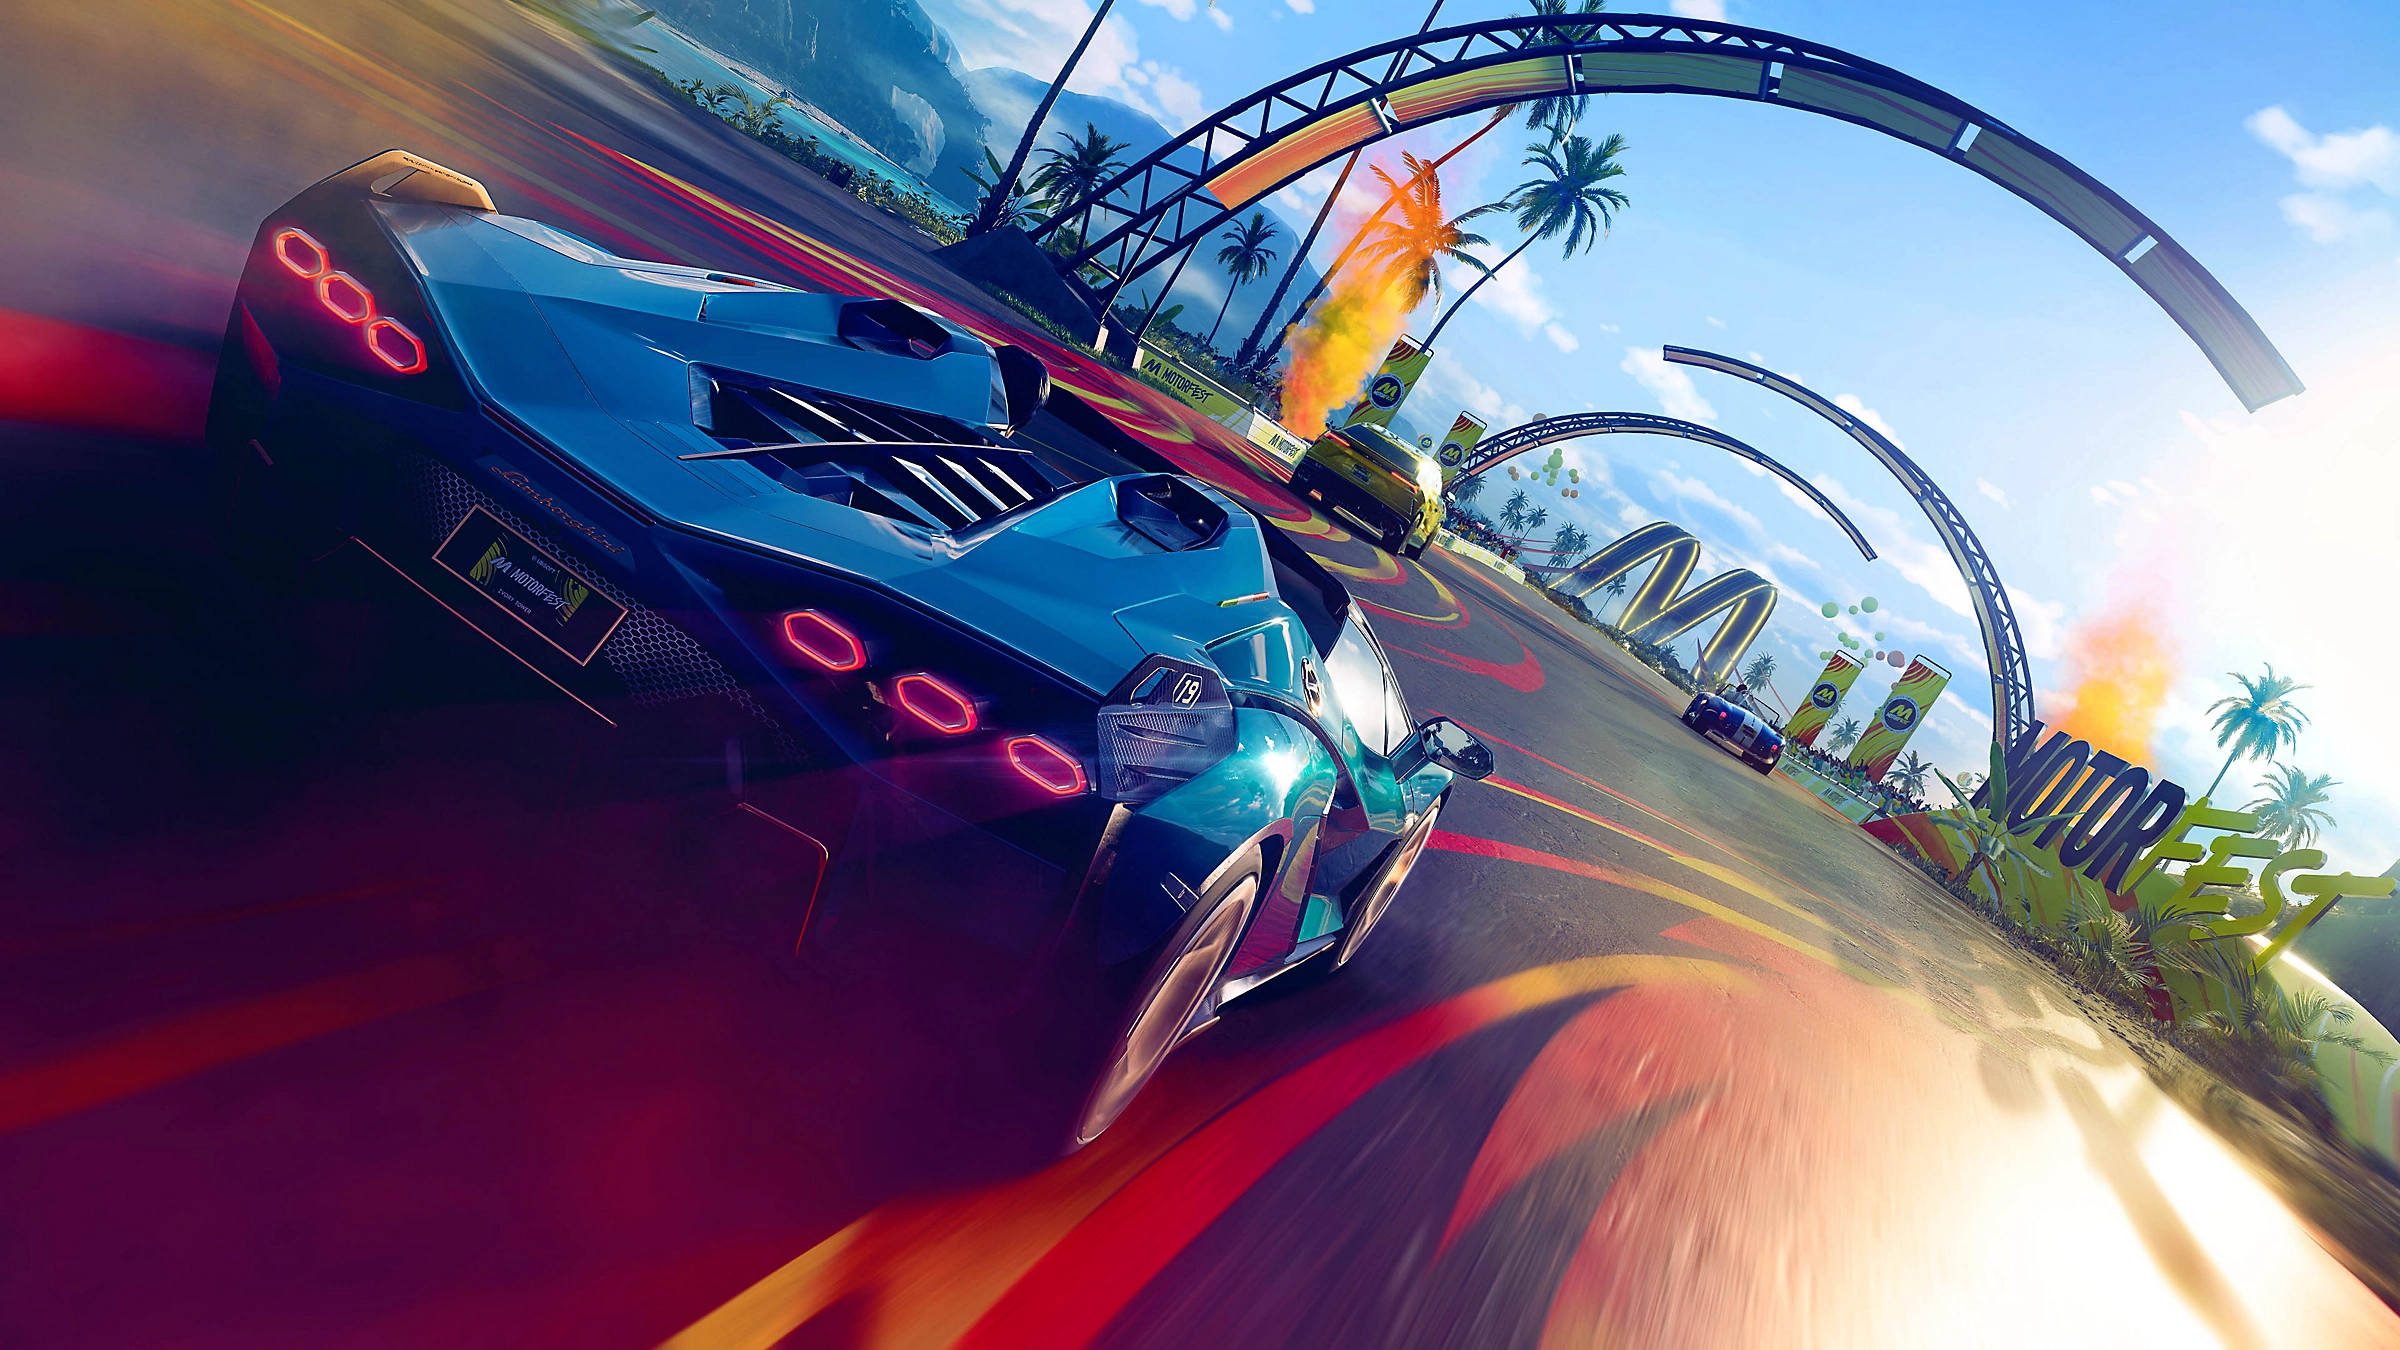 The Crew: Motorfest - Review — Analog Stick Gaming